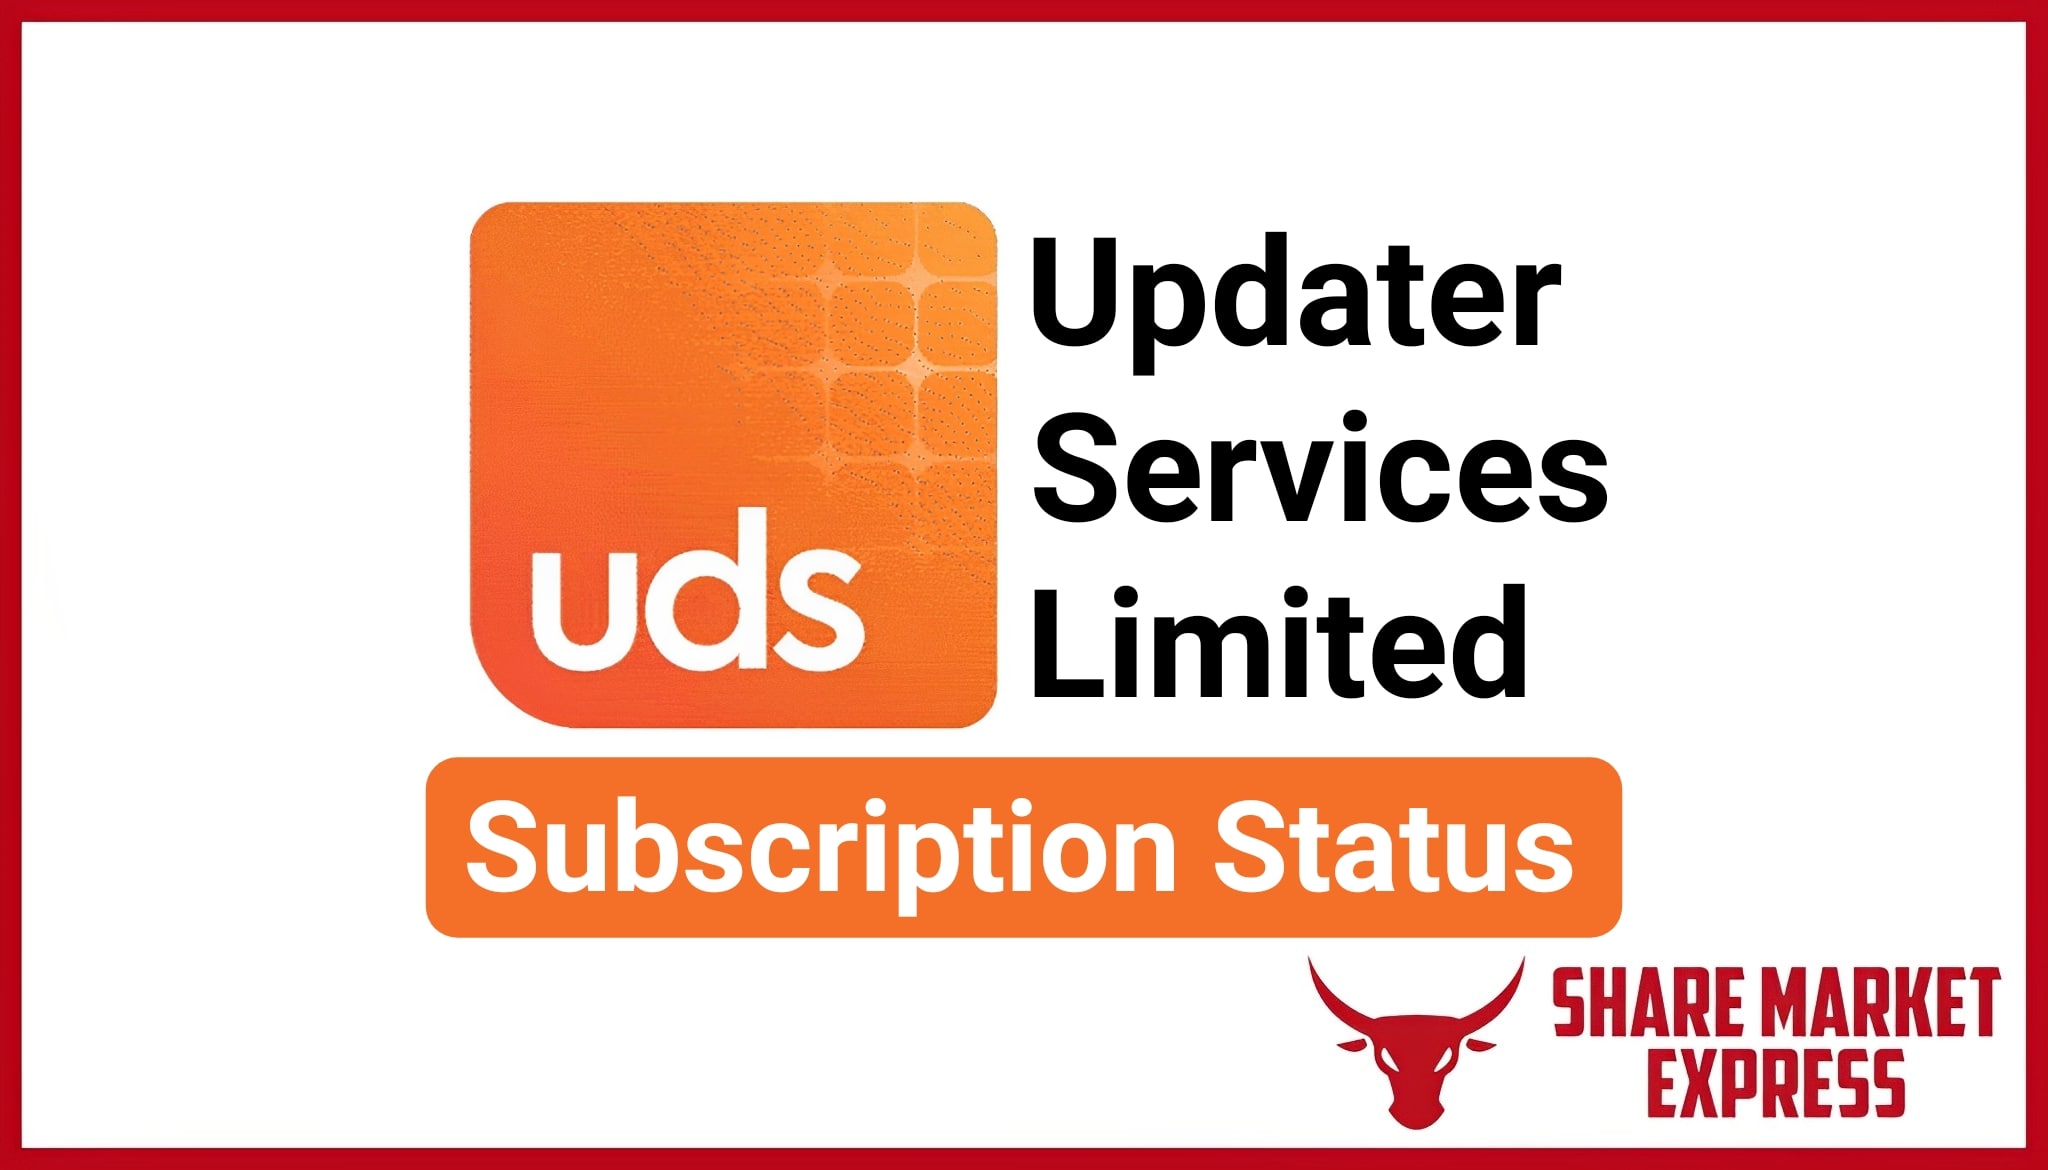 Updater Services IPO Subscription Status (Live Data)